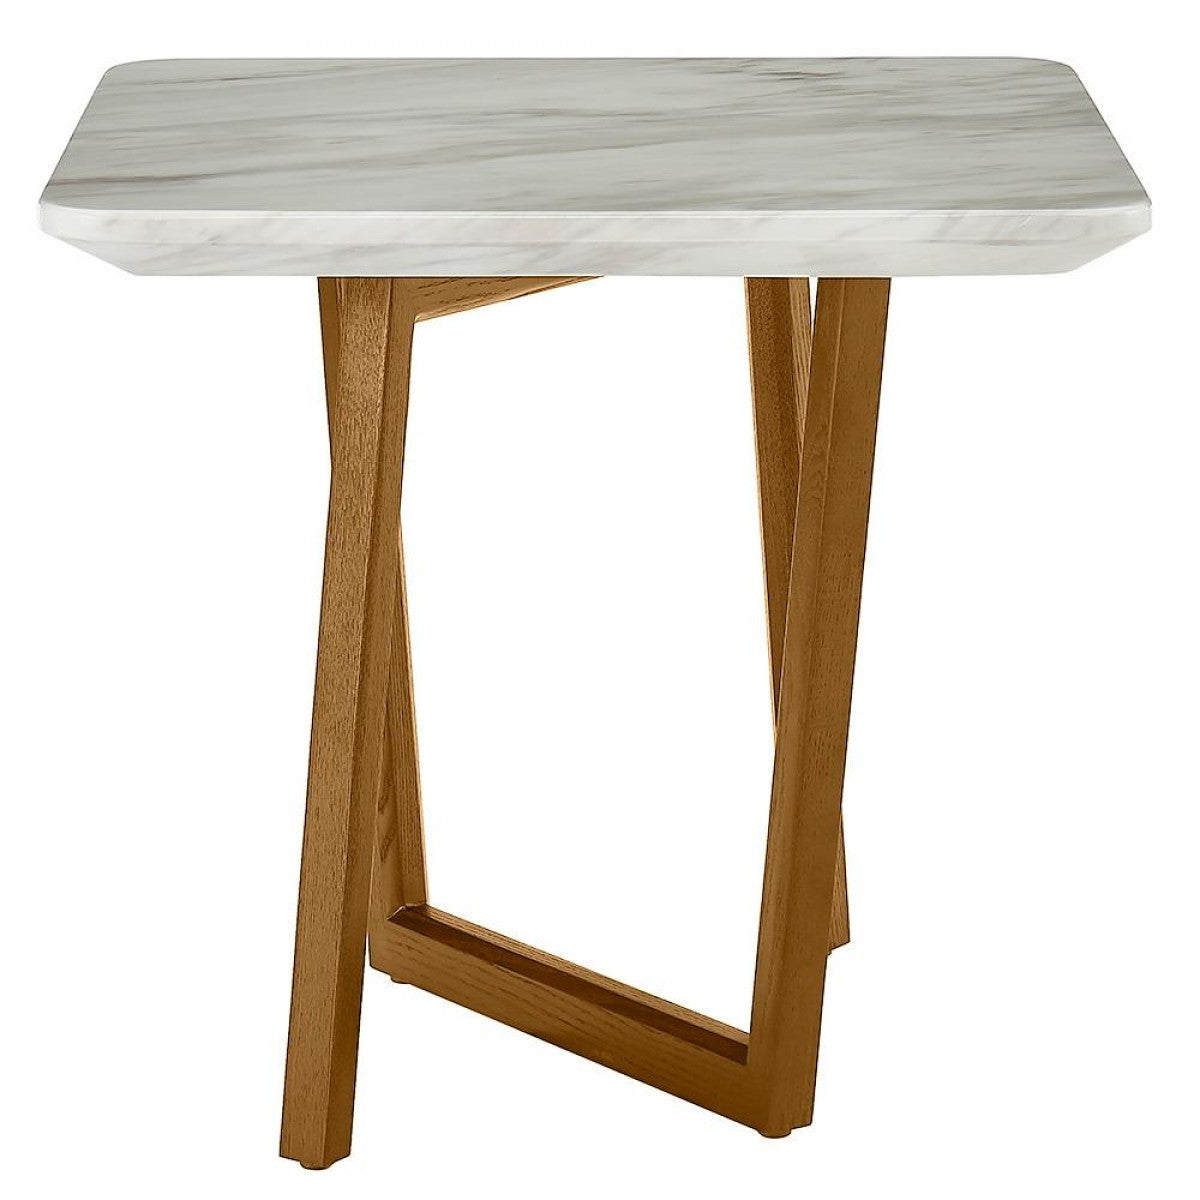 22" Walnut And White Faux Marble Square End Table